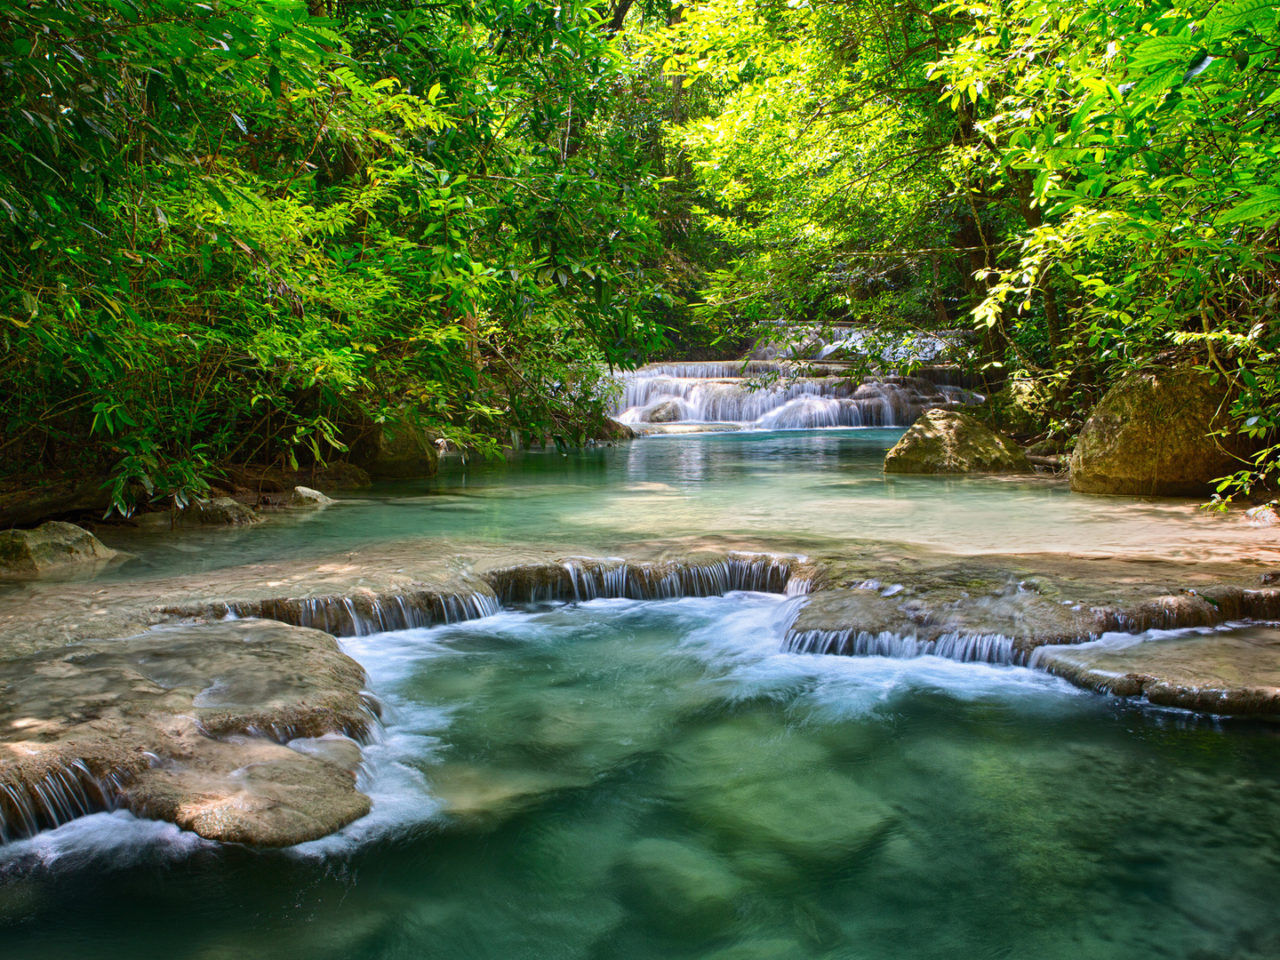 Thailand Tropical Vegetation Green River With Waterfalls And Stepped Wallpaper For Desktop Wallpaper HD For Desktop Full Screen 1920x1080, Wallpaper13.com